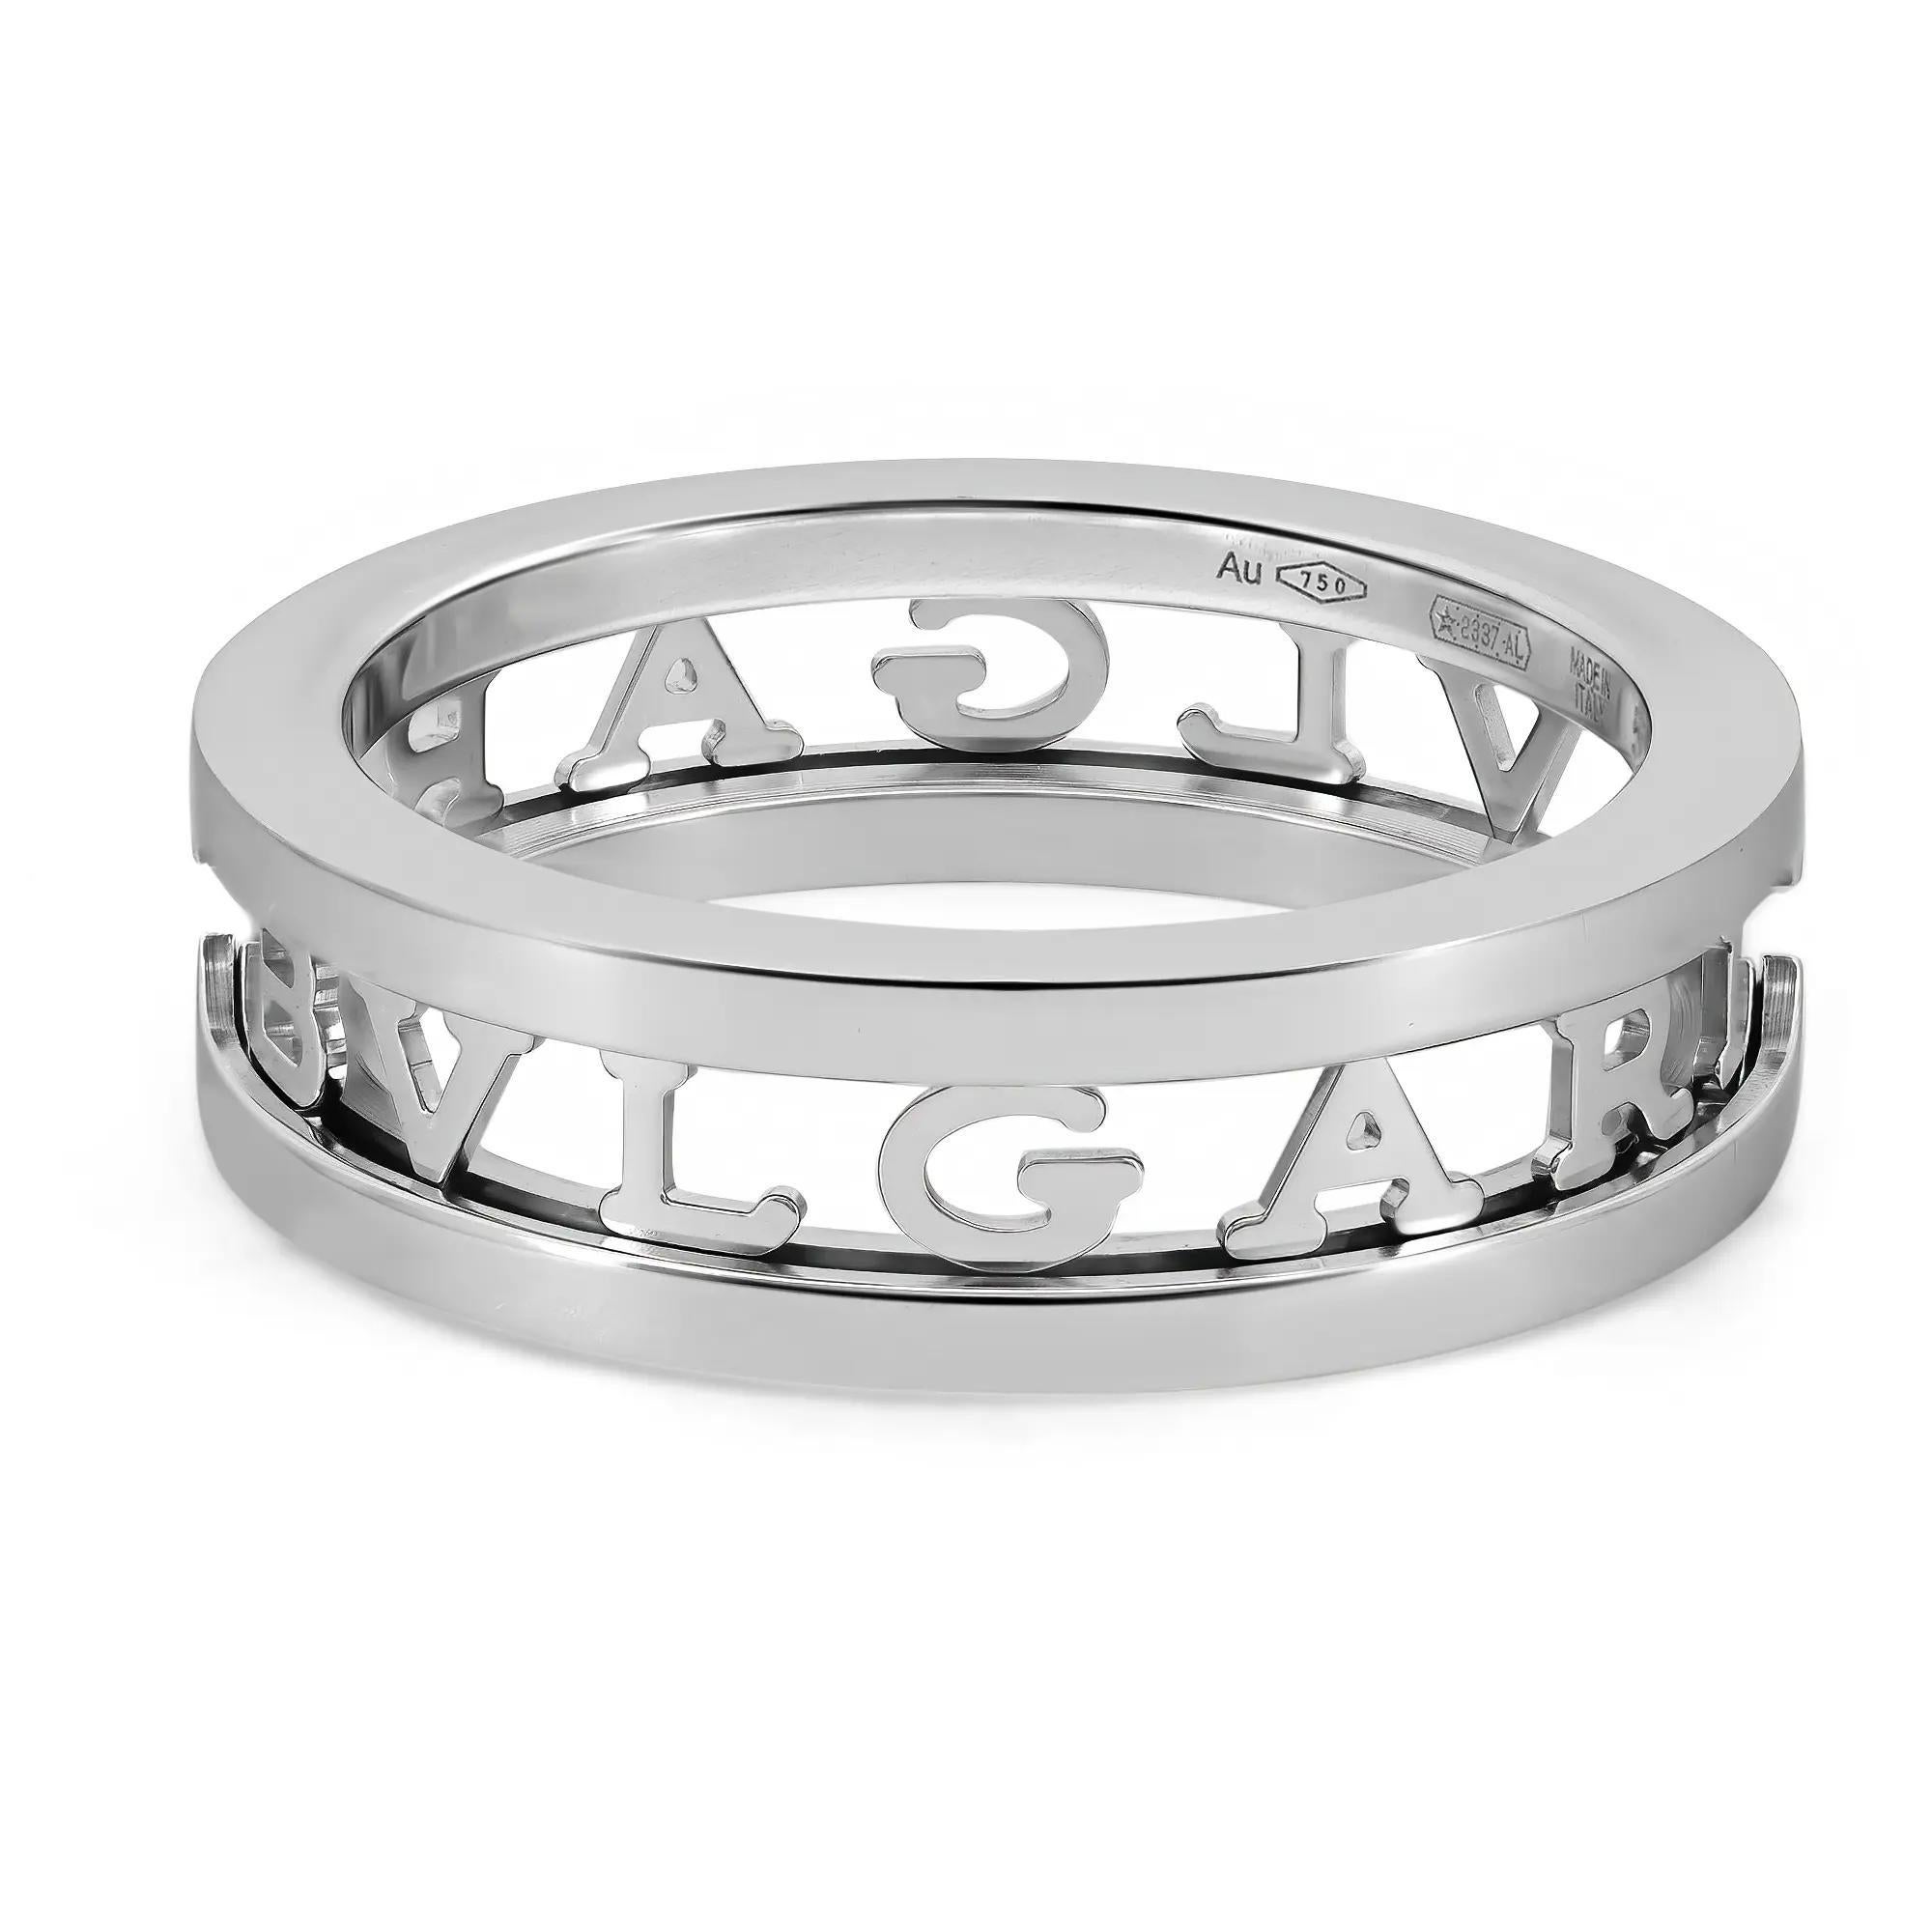 Fabulous and chic, this Bvlgari B.Zero1 band ring is a ground-breaking statement of Bulgari’s creative vision. Crafted in lustrous 18K white gold. It features the iconic BVLGARI logo as a bold element of design in a one-band openwork spiral ring.